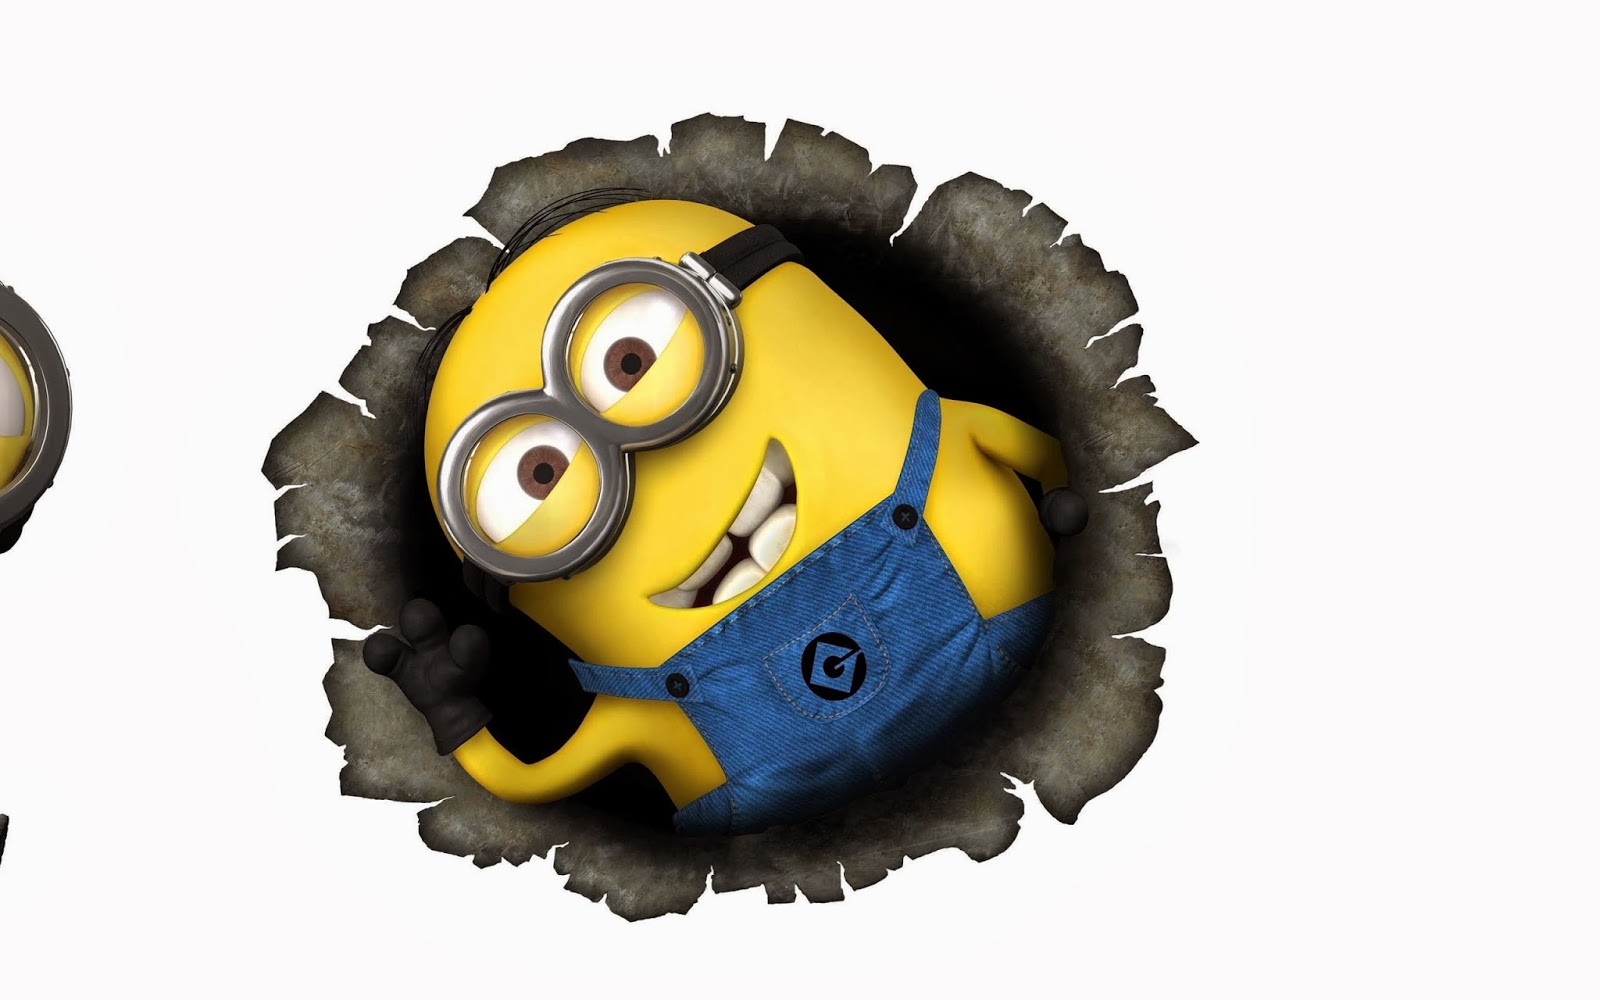 Minion wallpaper and cool minions  cute minions pictures  from minion  wallpaper for windows 10 Watch Video  HiFiMovco